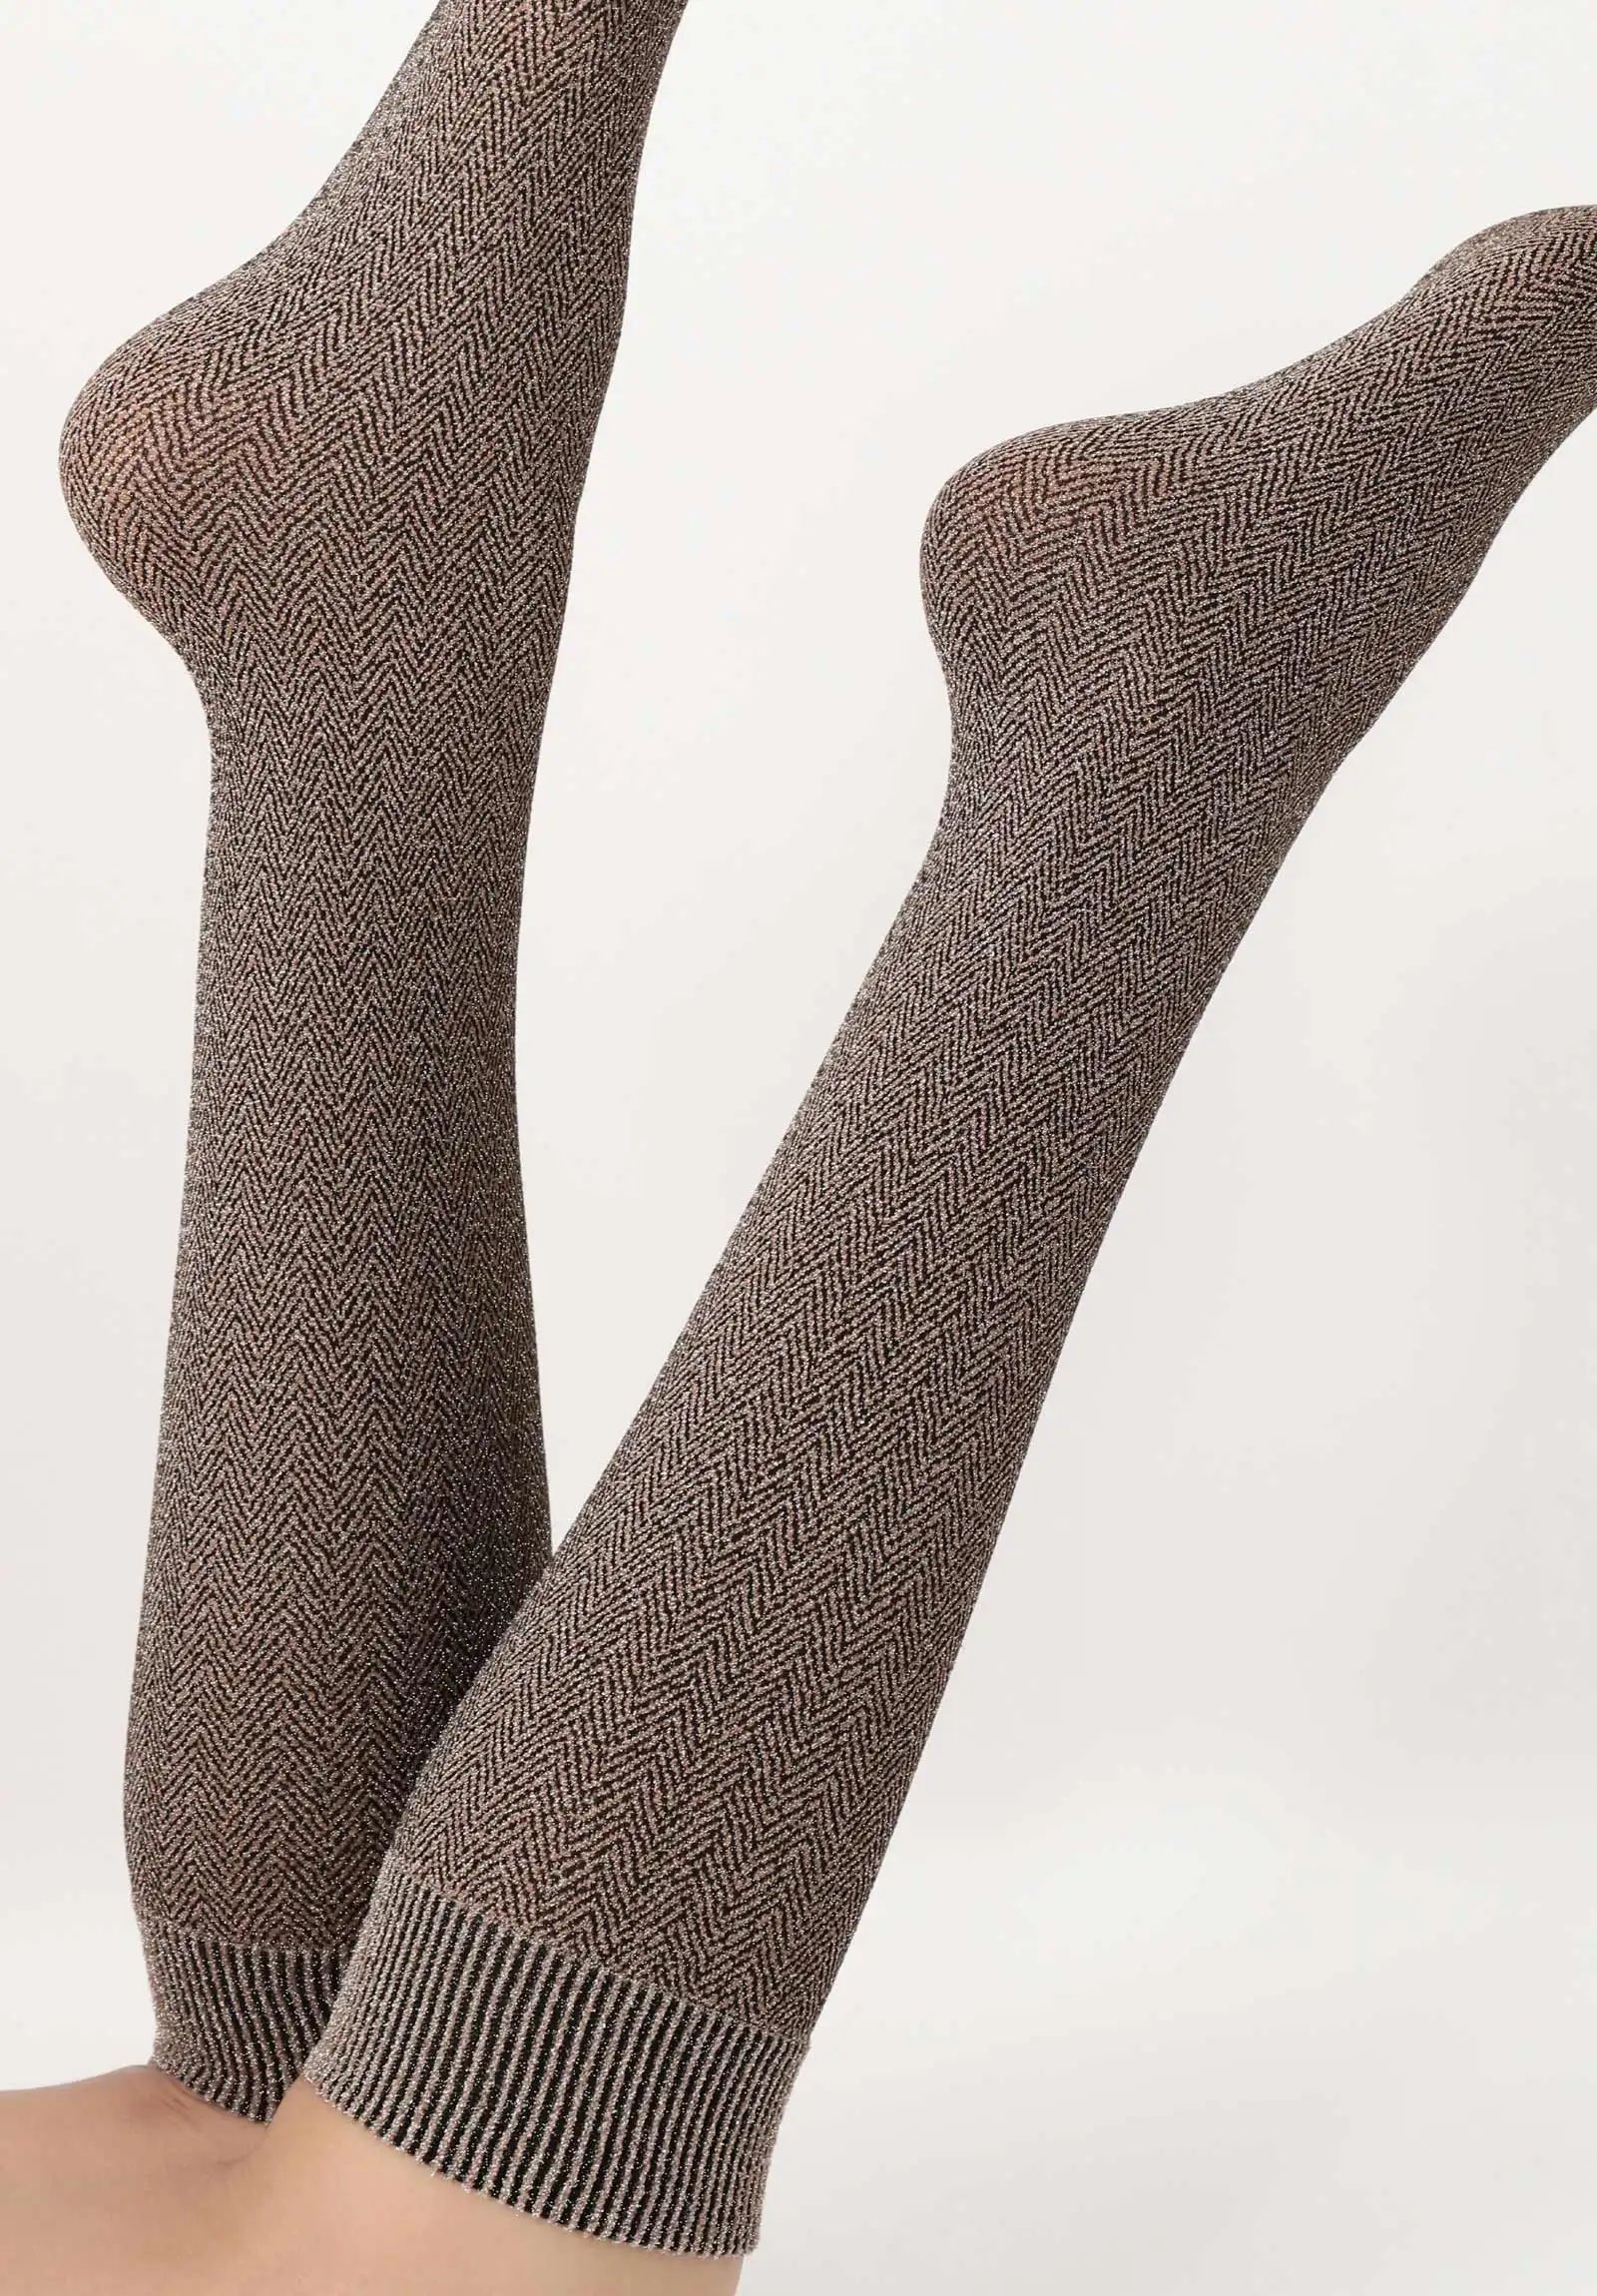 Oroblù Tweed Sparkly Gambaletto - Opaque two-toned tweed herringbone patterned fashion knee-high socks in beige and black with sparkly silver lamé and light ribbed elasticated comfort cuff.